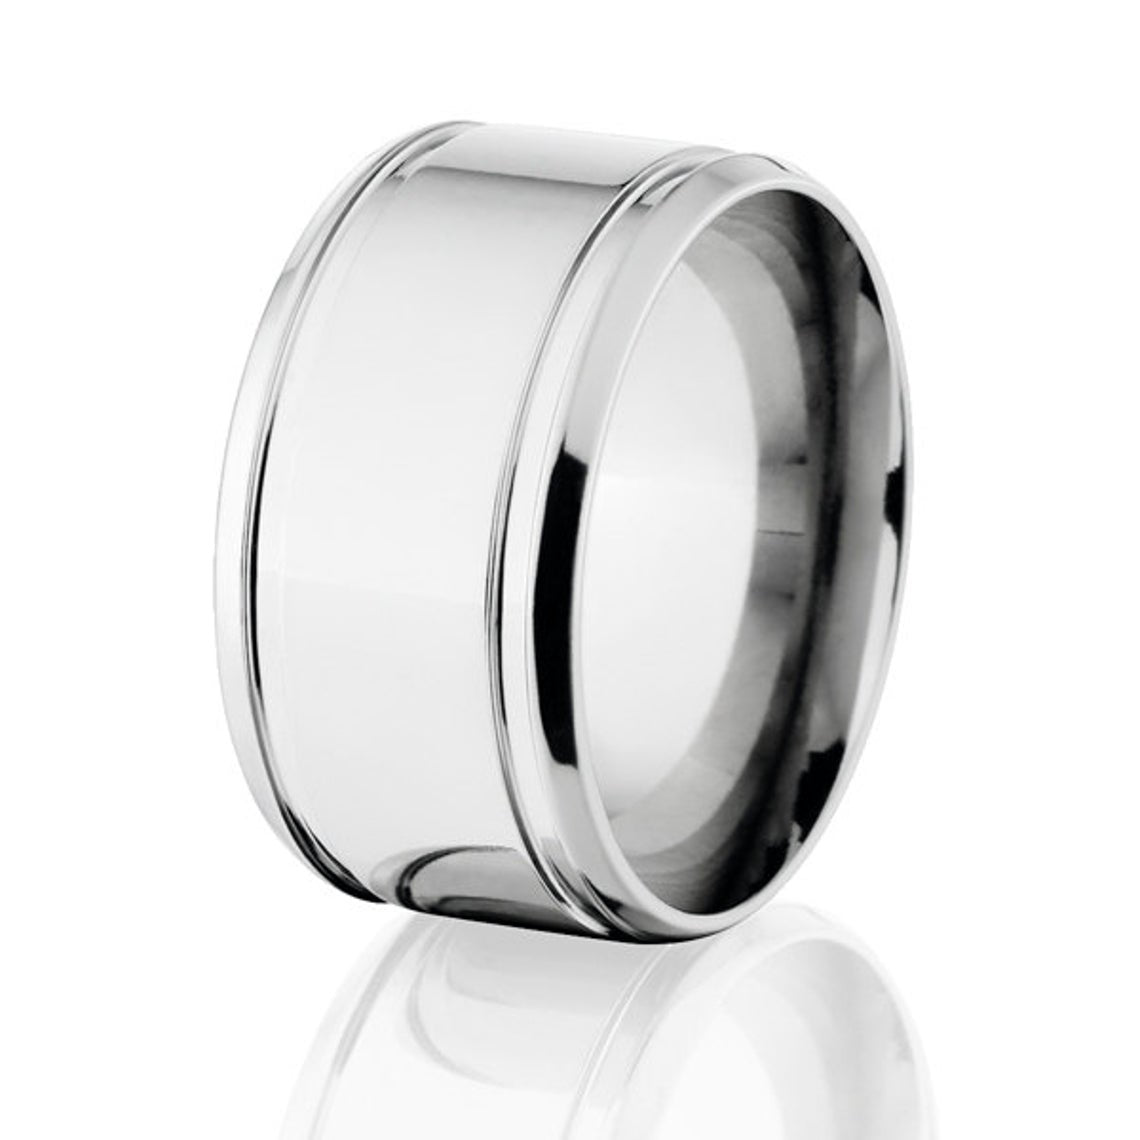 12mm wide cobalt ring with dual edge grooves